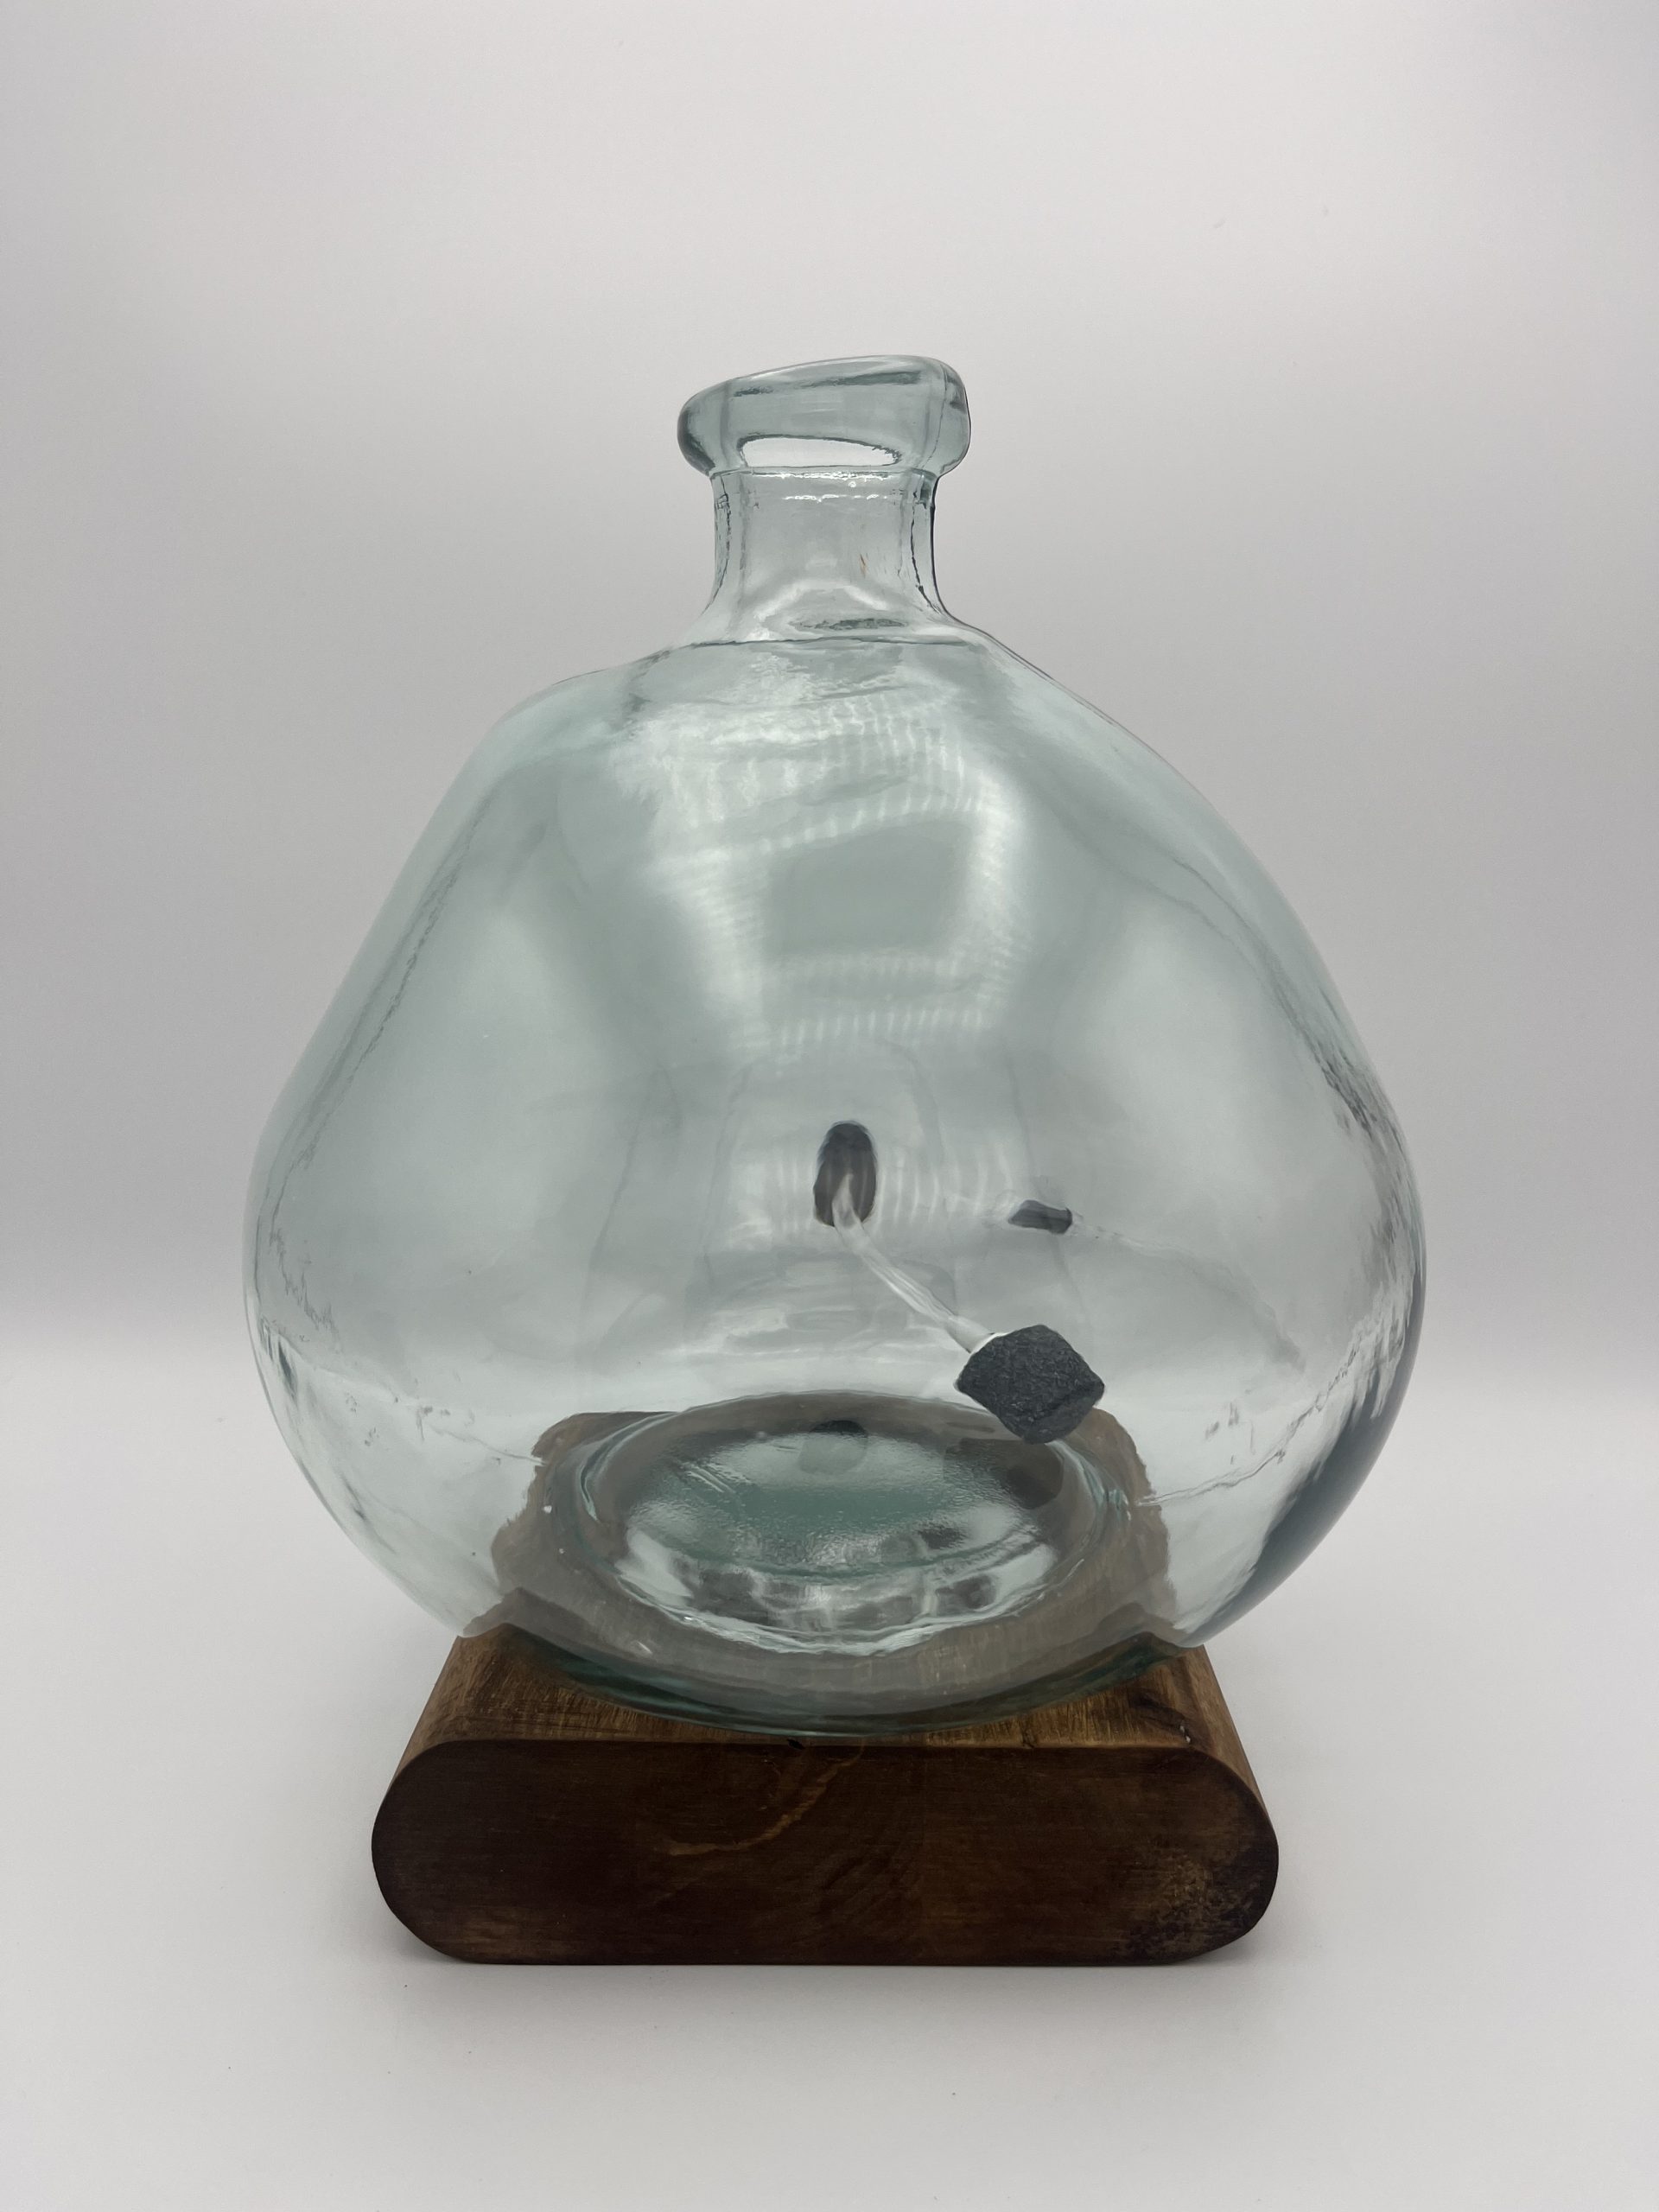 Large Clear Globe ; Rounded Wood Block